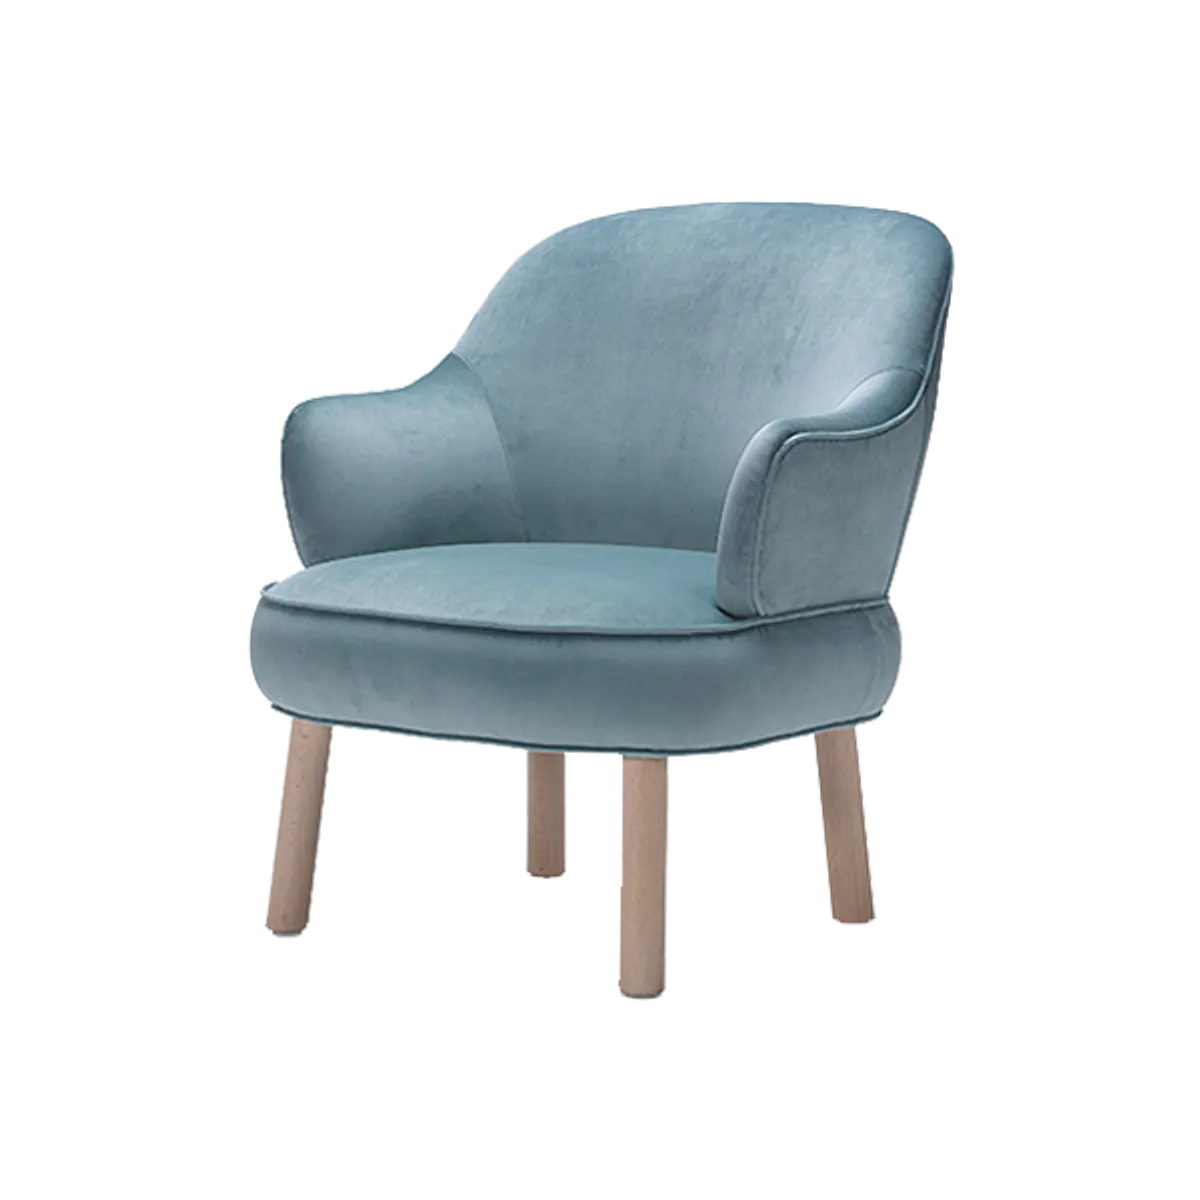 Web Nemo Low Armchair For Upmarket Cafe Lounge Spaces 1912